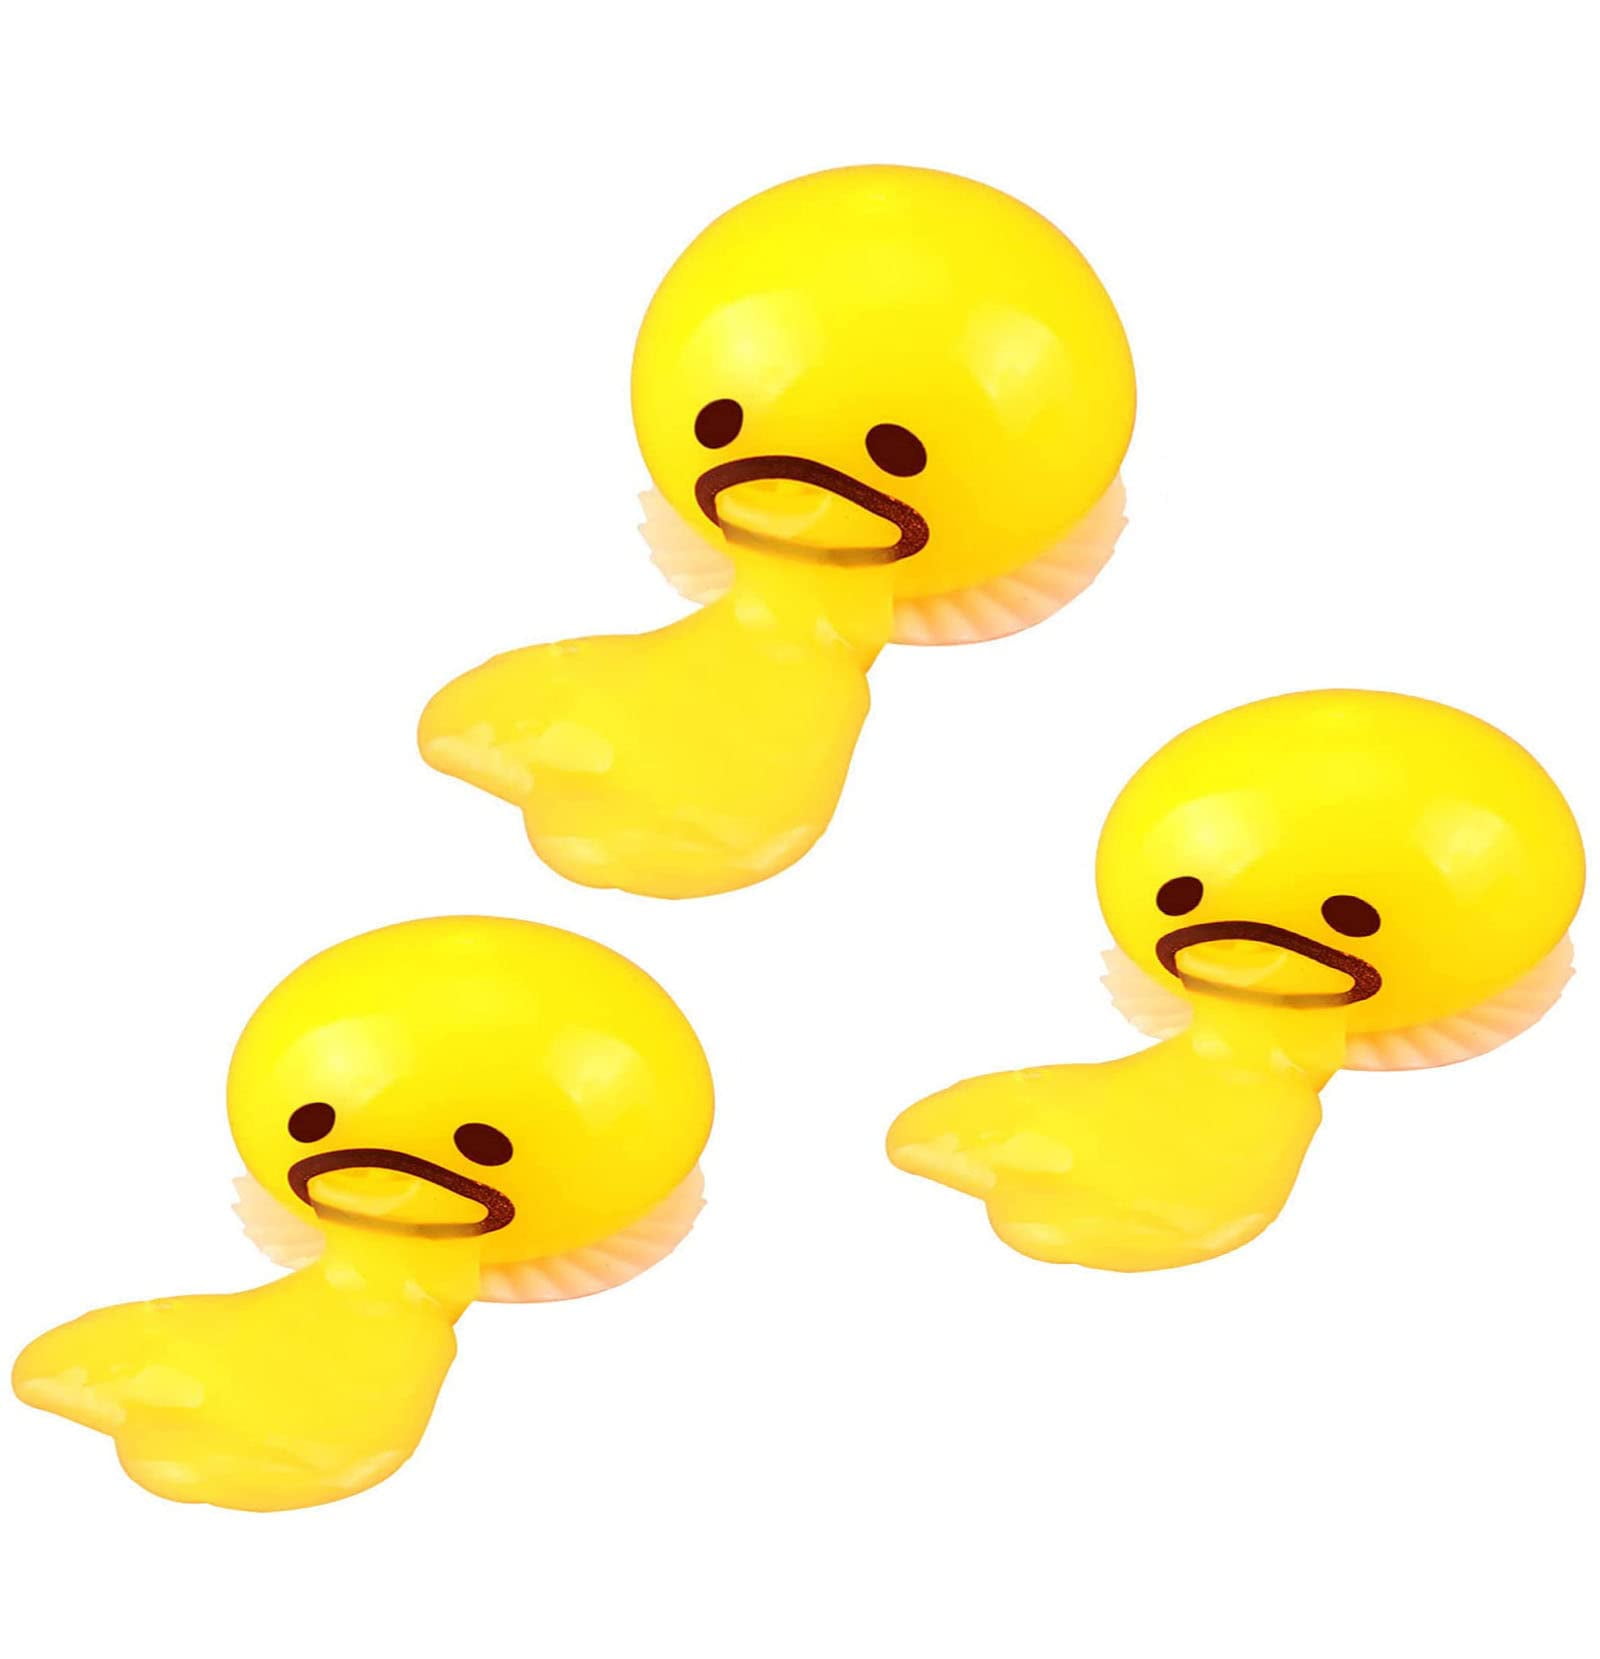  Vomiting Stress Ball, Egg Yolk Slime Ball Prank Toy, Cute Lazy  Vomiting Sucking Ball, Funny Stress Relief Fidget Toys Gag Gifts (4 PCS & 4  Colors) : Toys & Games